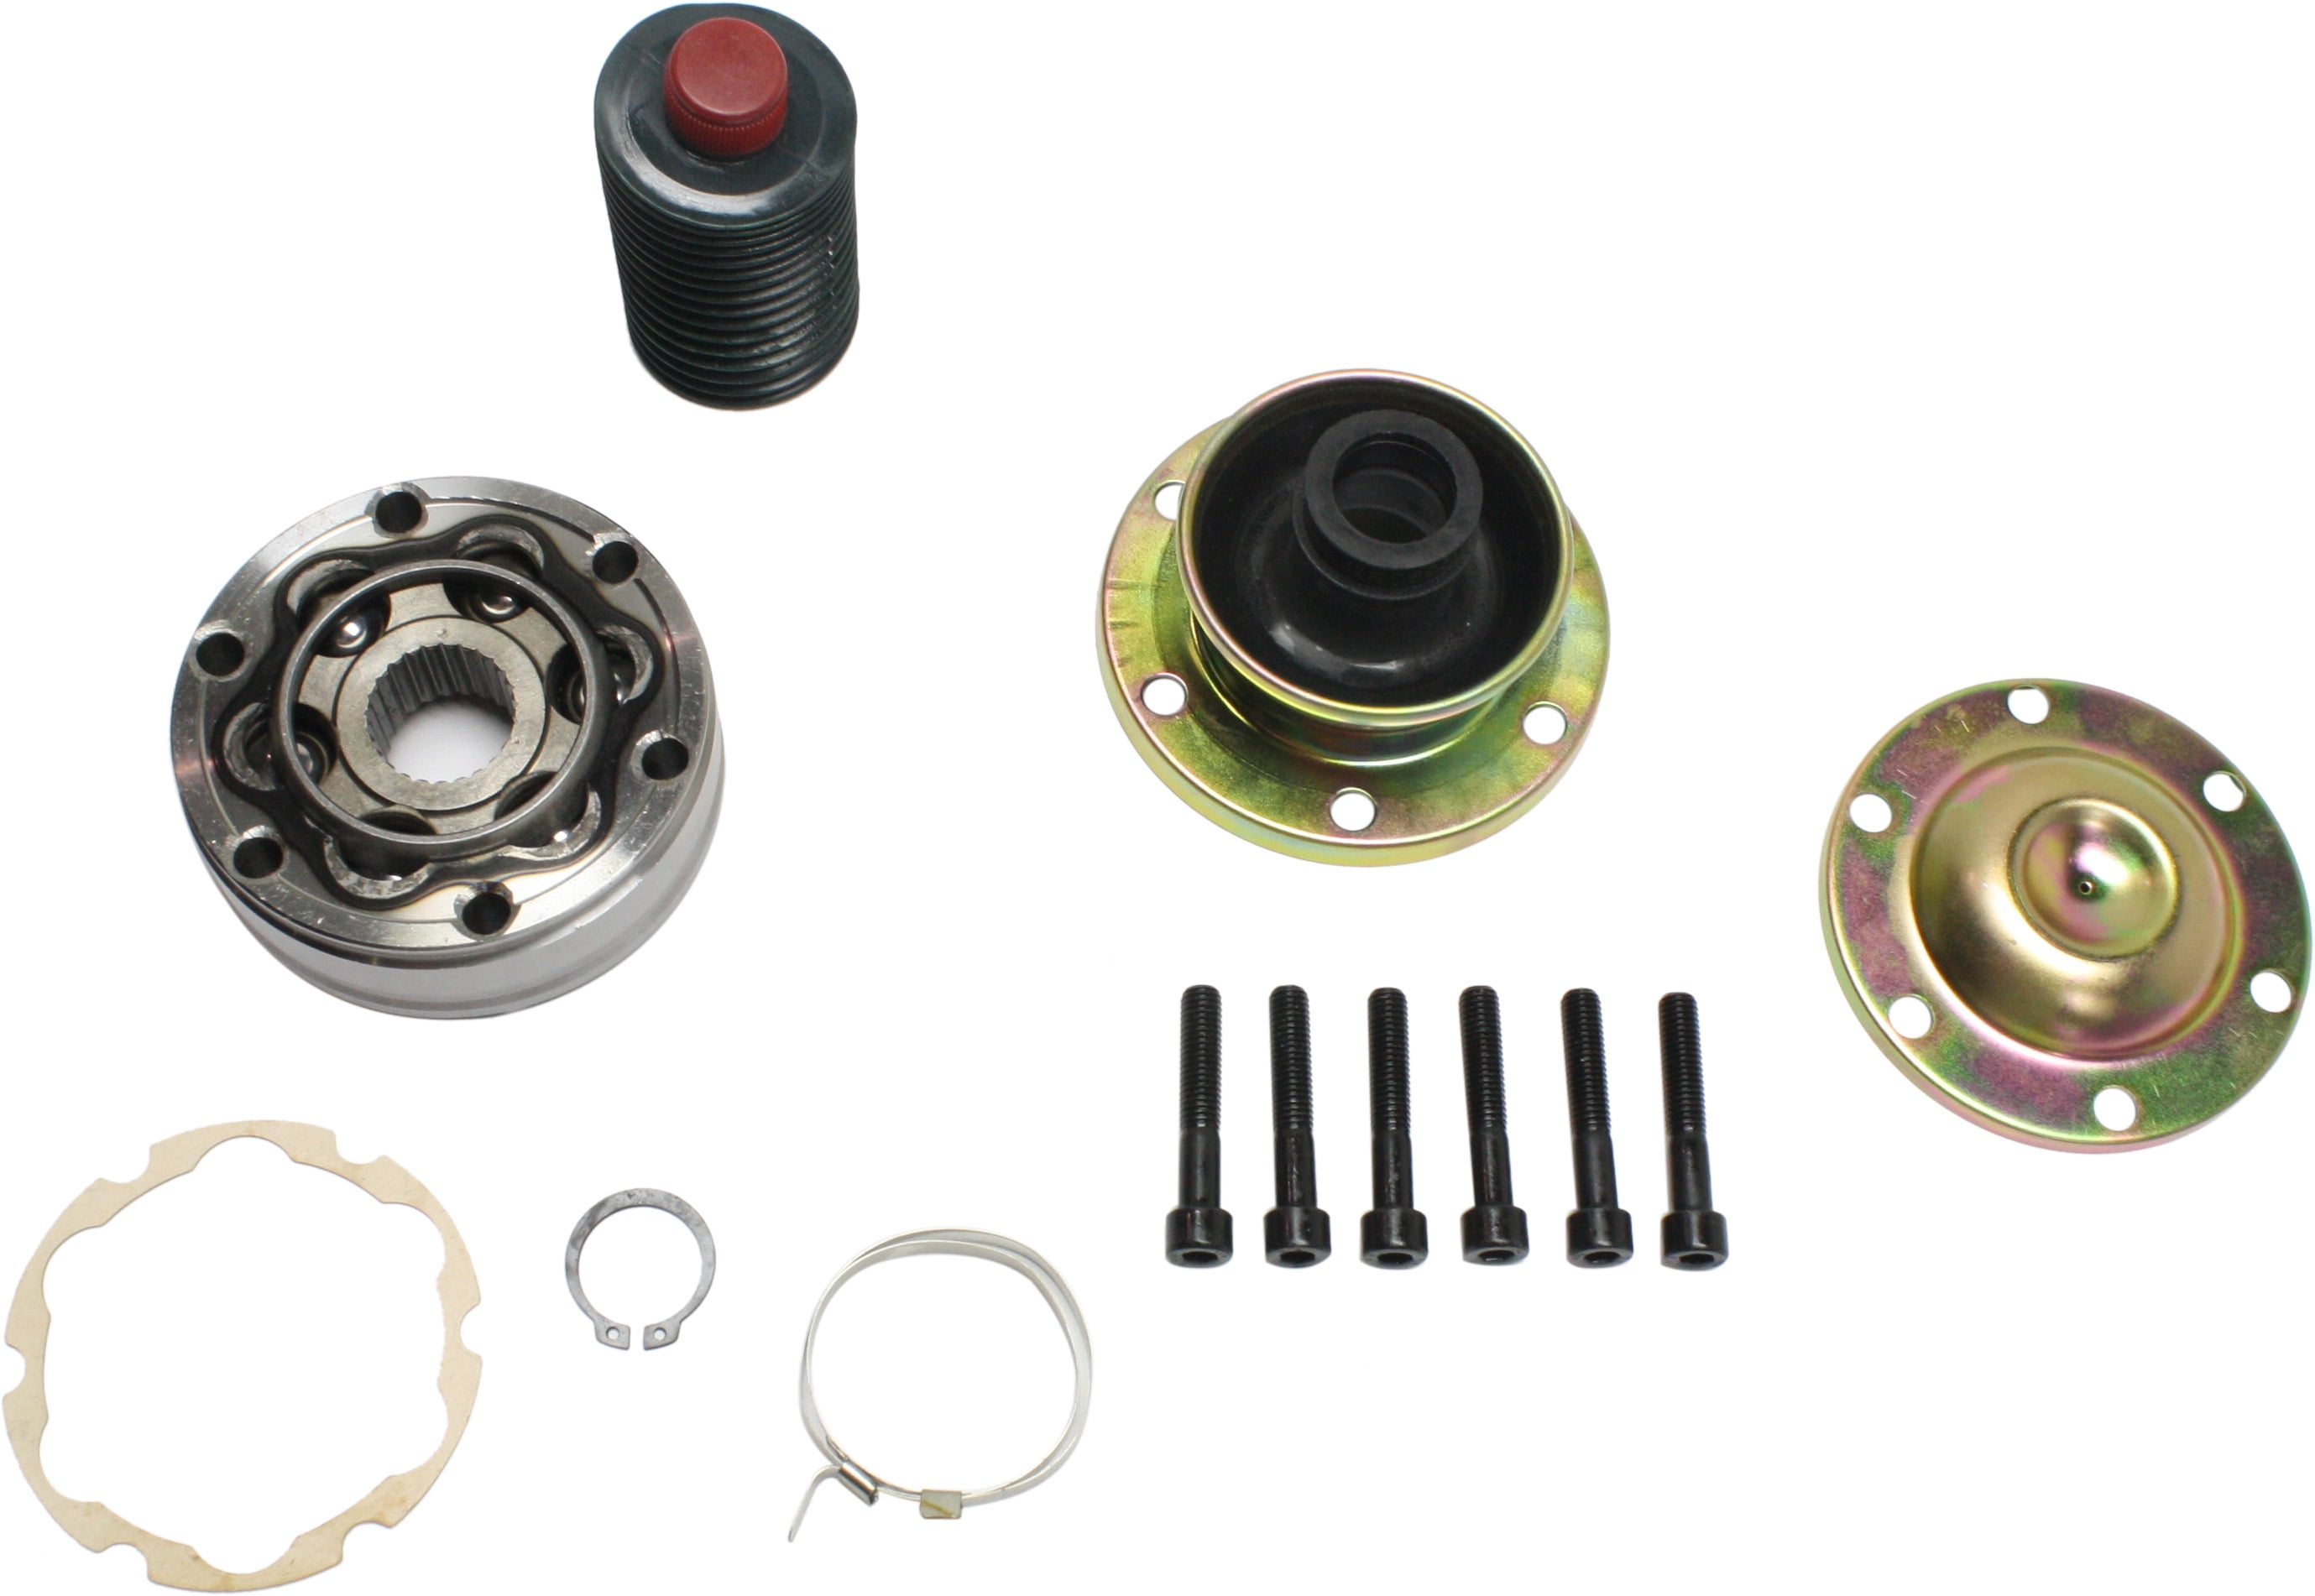 Prop Driveshaft Front CV Joint Repair Kit Fits Jeep Grand Cherokee 1999-2006 